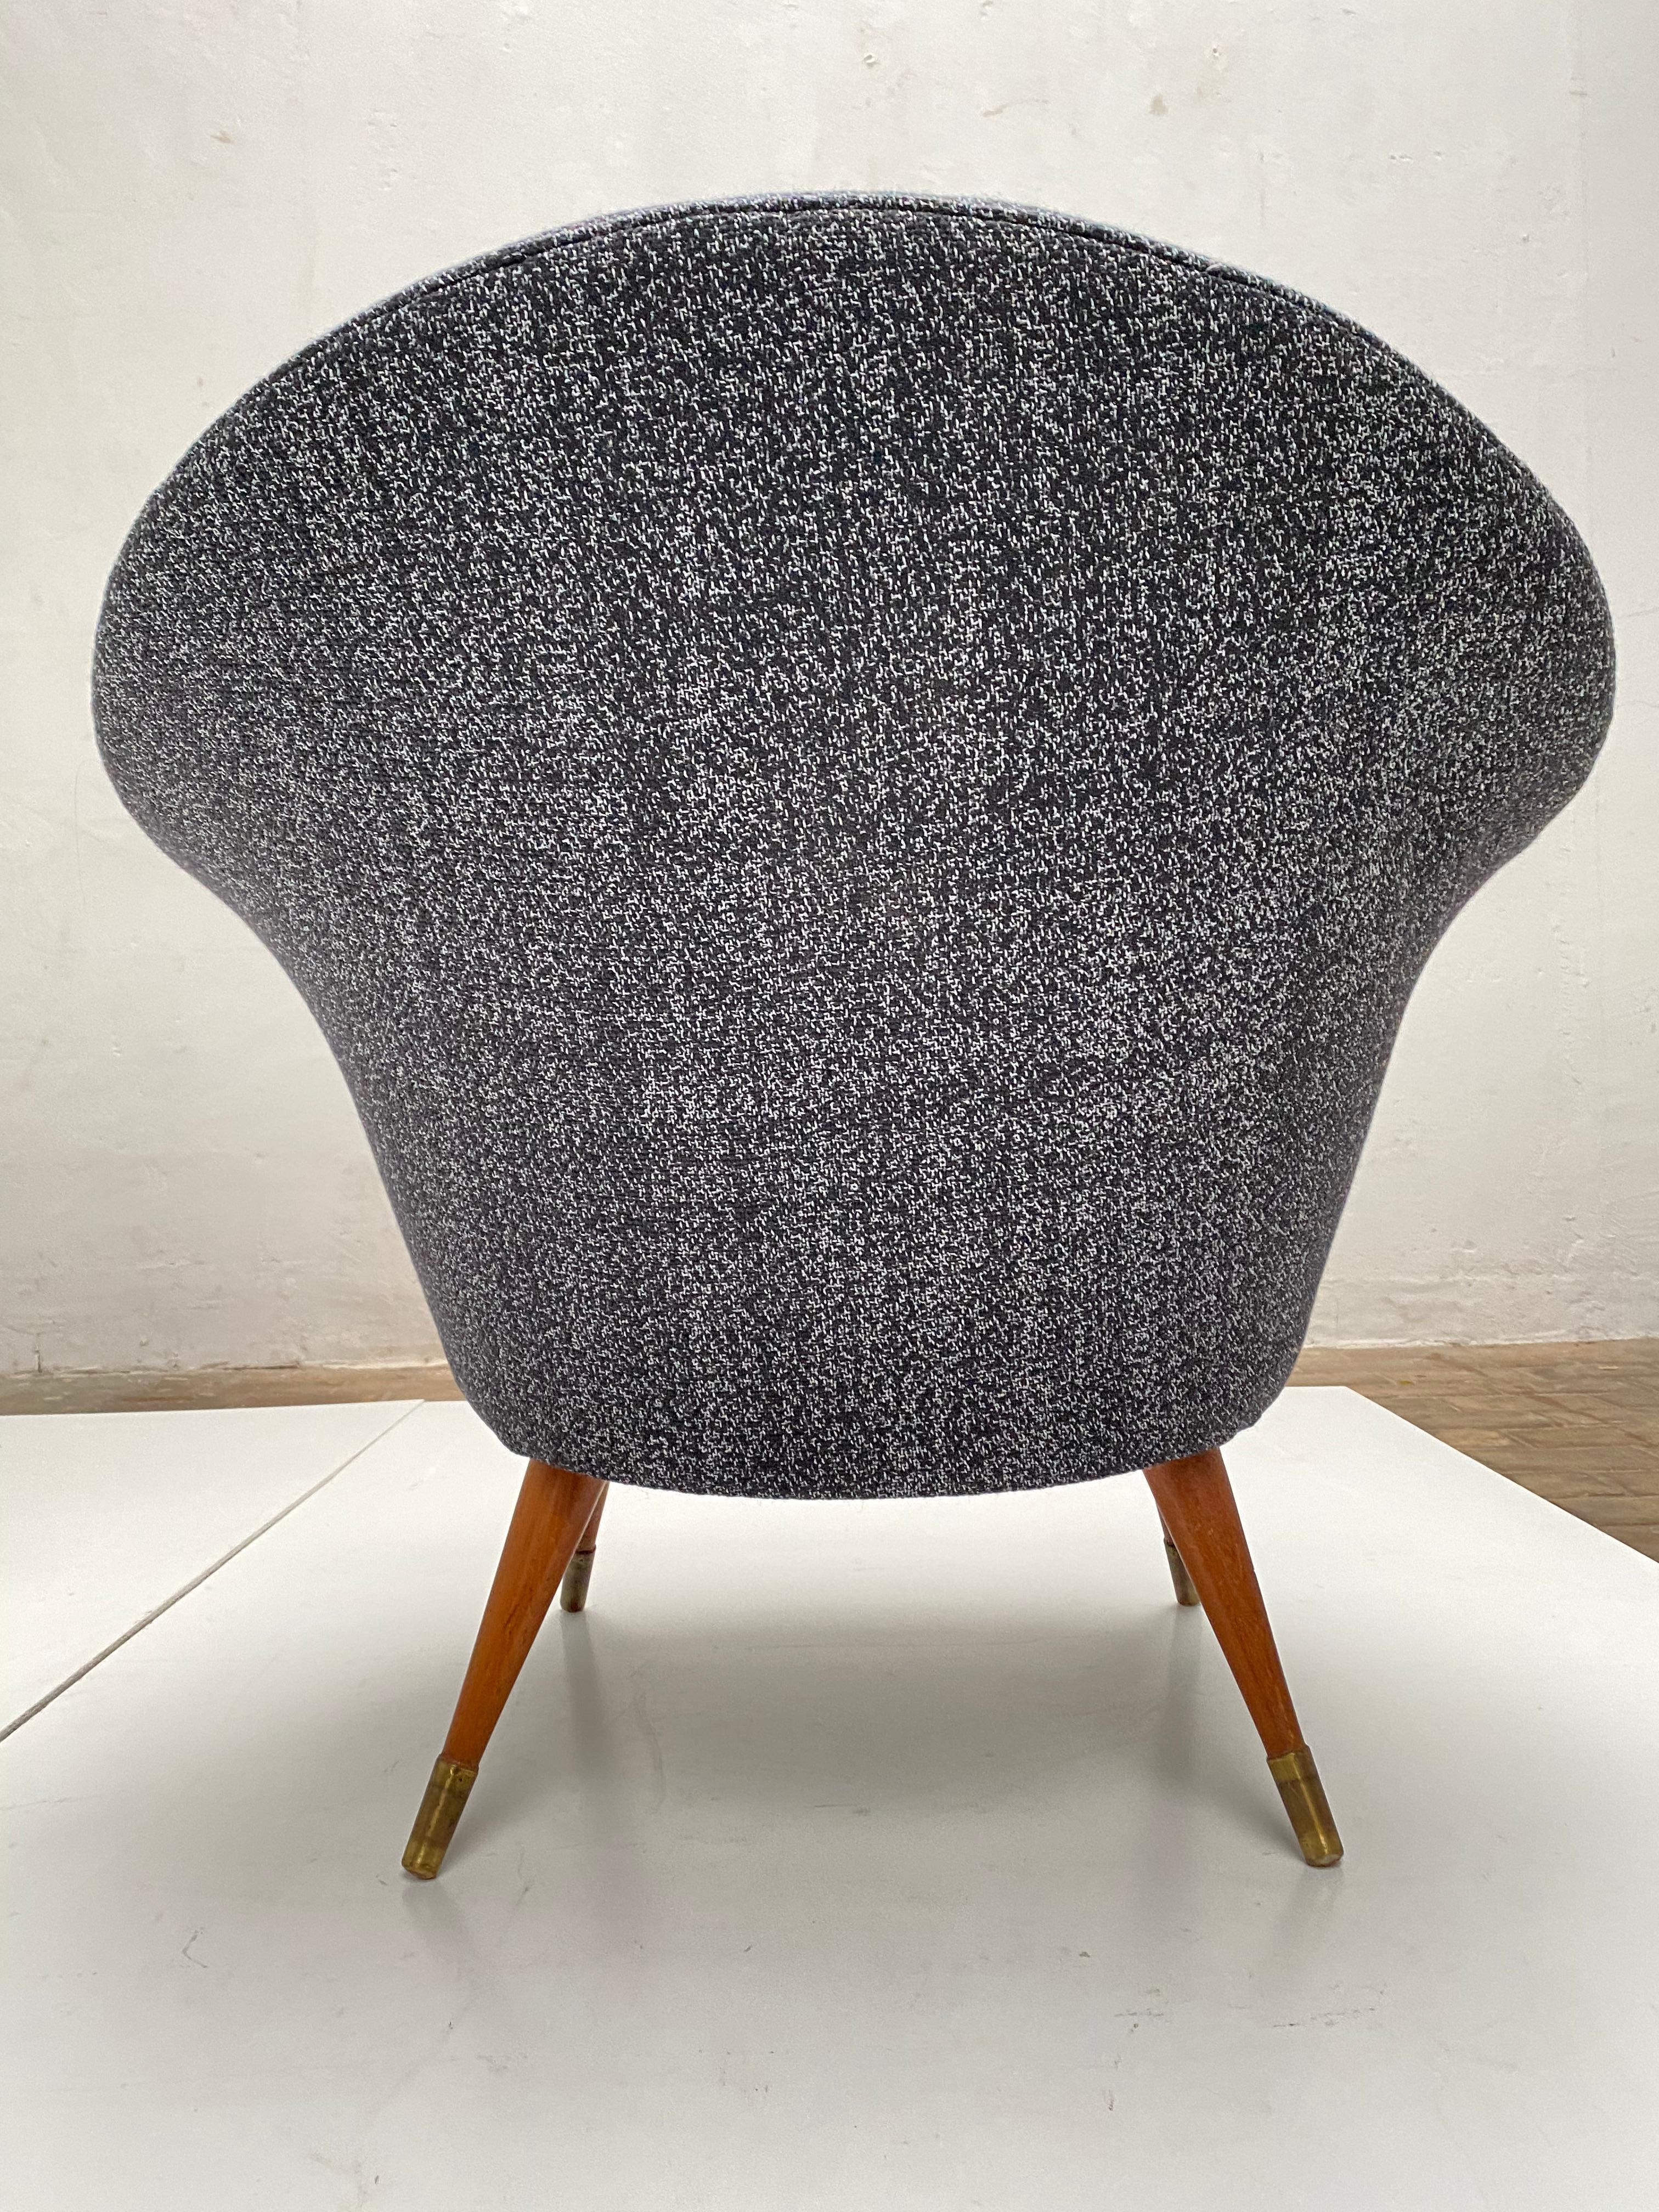 Mid-20th Century Scandinavian Teak Wool and Brass Lounge Chair 1950s New Upholstery!